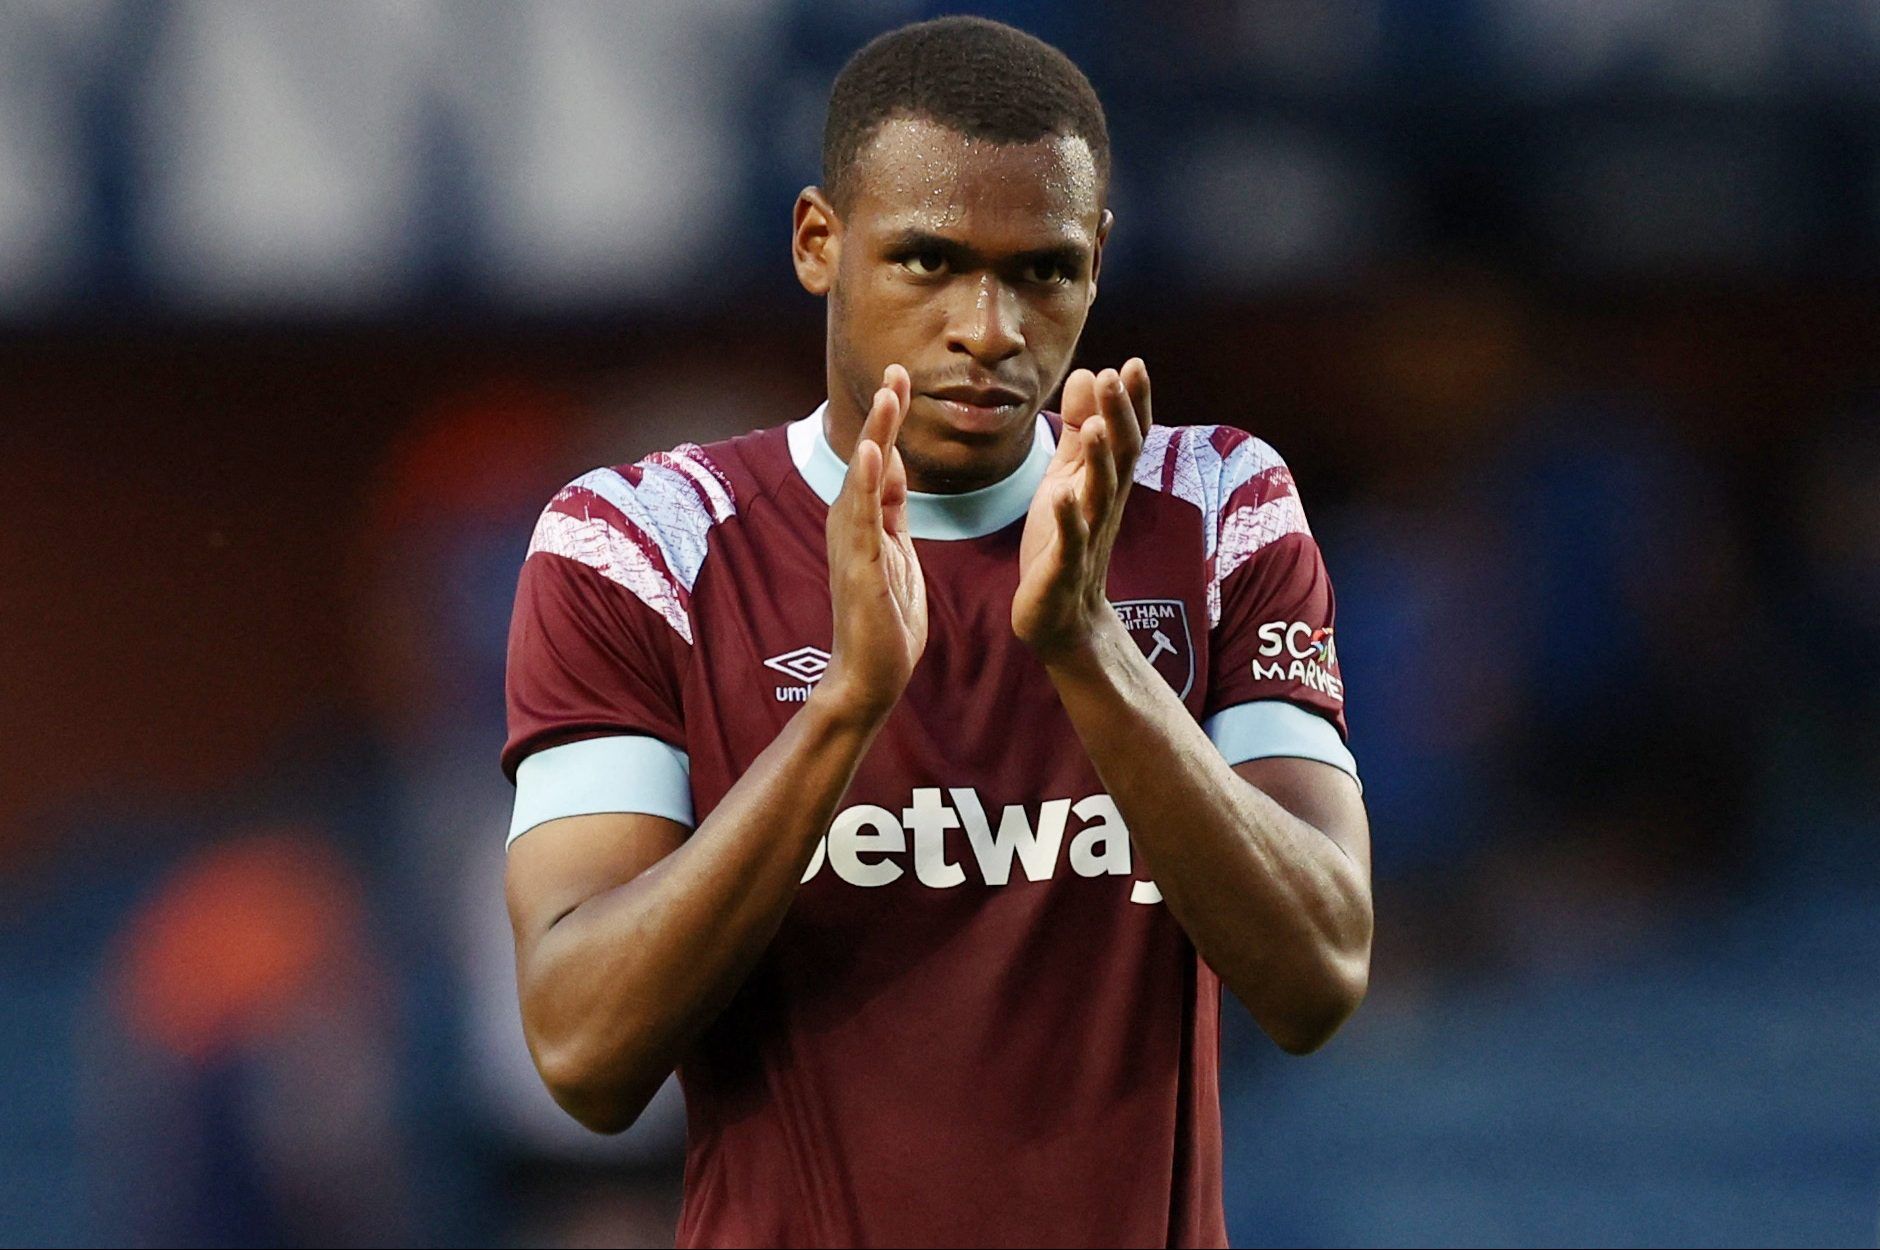 Soccer Football - Pre Season Friendly - Rangers v West Ham United - Ibrox Stadium, Glasgow, Scotland, Britain - July 19, 2022 West Ham United's Issa Diop applauds the fans after the match REUTERS/Russell Cheyne